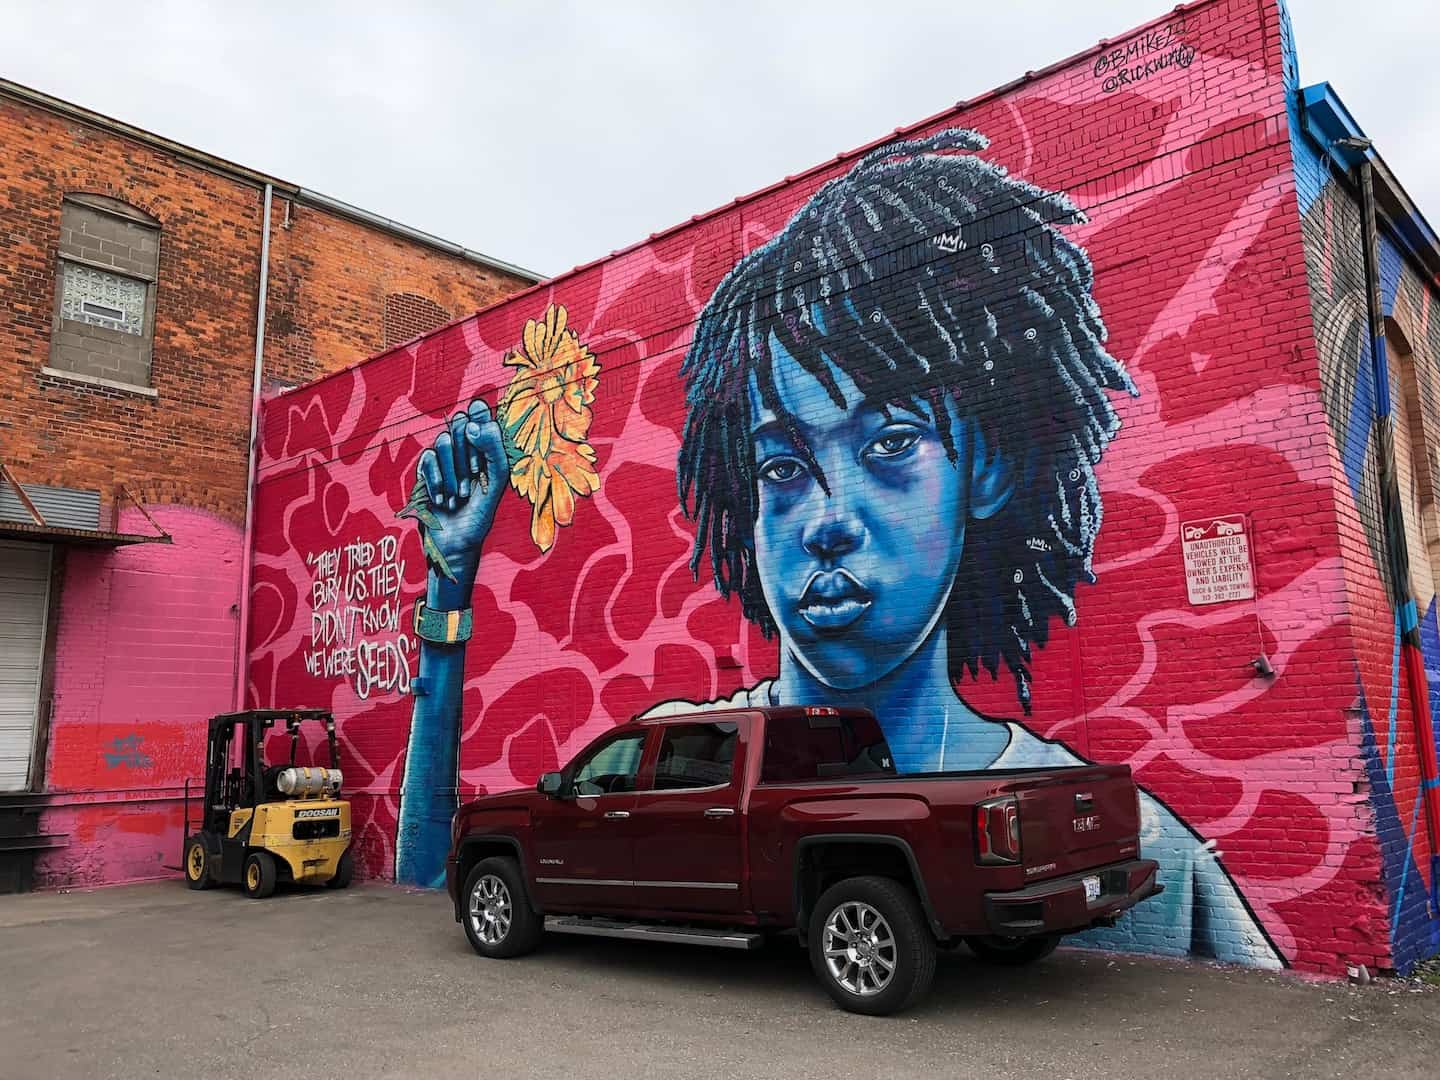 Detroit street art is concentrated in Eastern Market, a neighborhood that has literally 100s of murals. This is a must-do activity in Detroit! To & Fro Fam